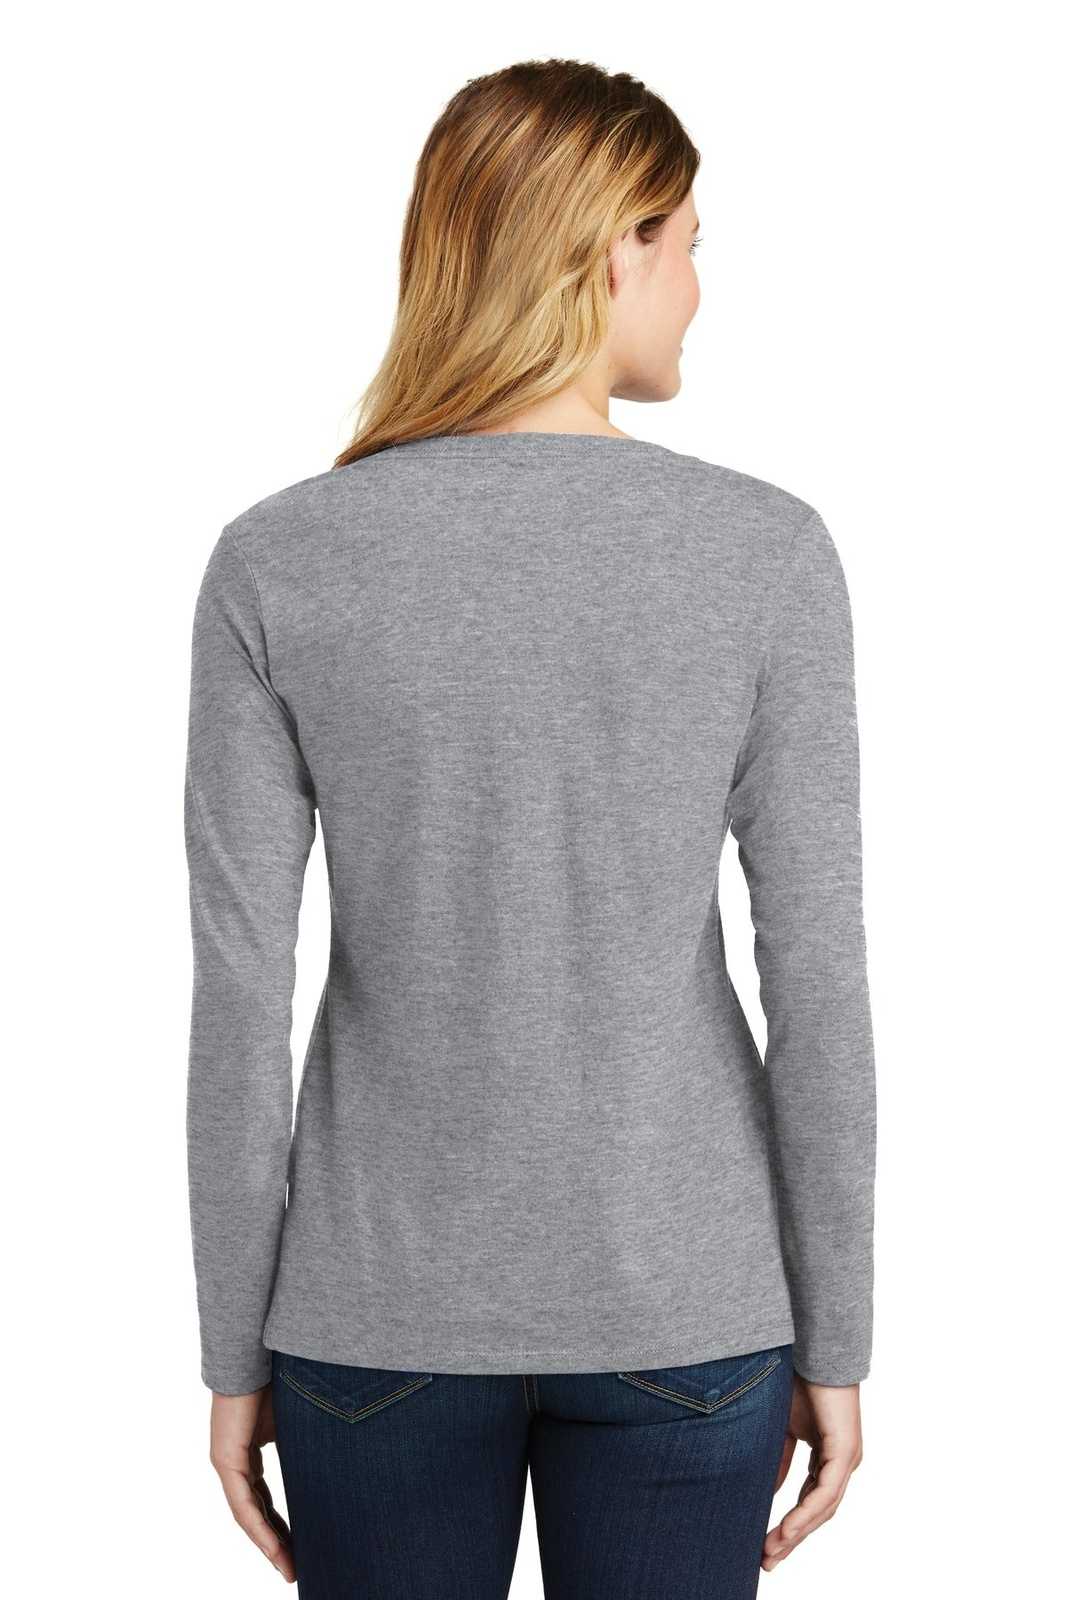 Port &amp; Company LPC450VLS Ladies Long Sleeve Fan Favorite V-Neck Tee - Athletic Heather - HIT a Double - 2